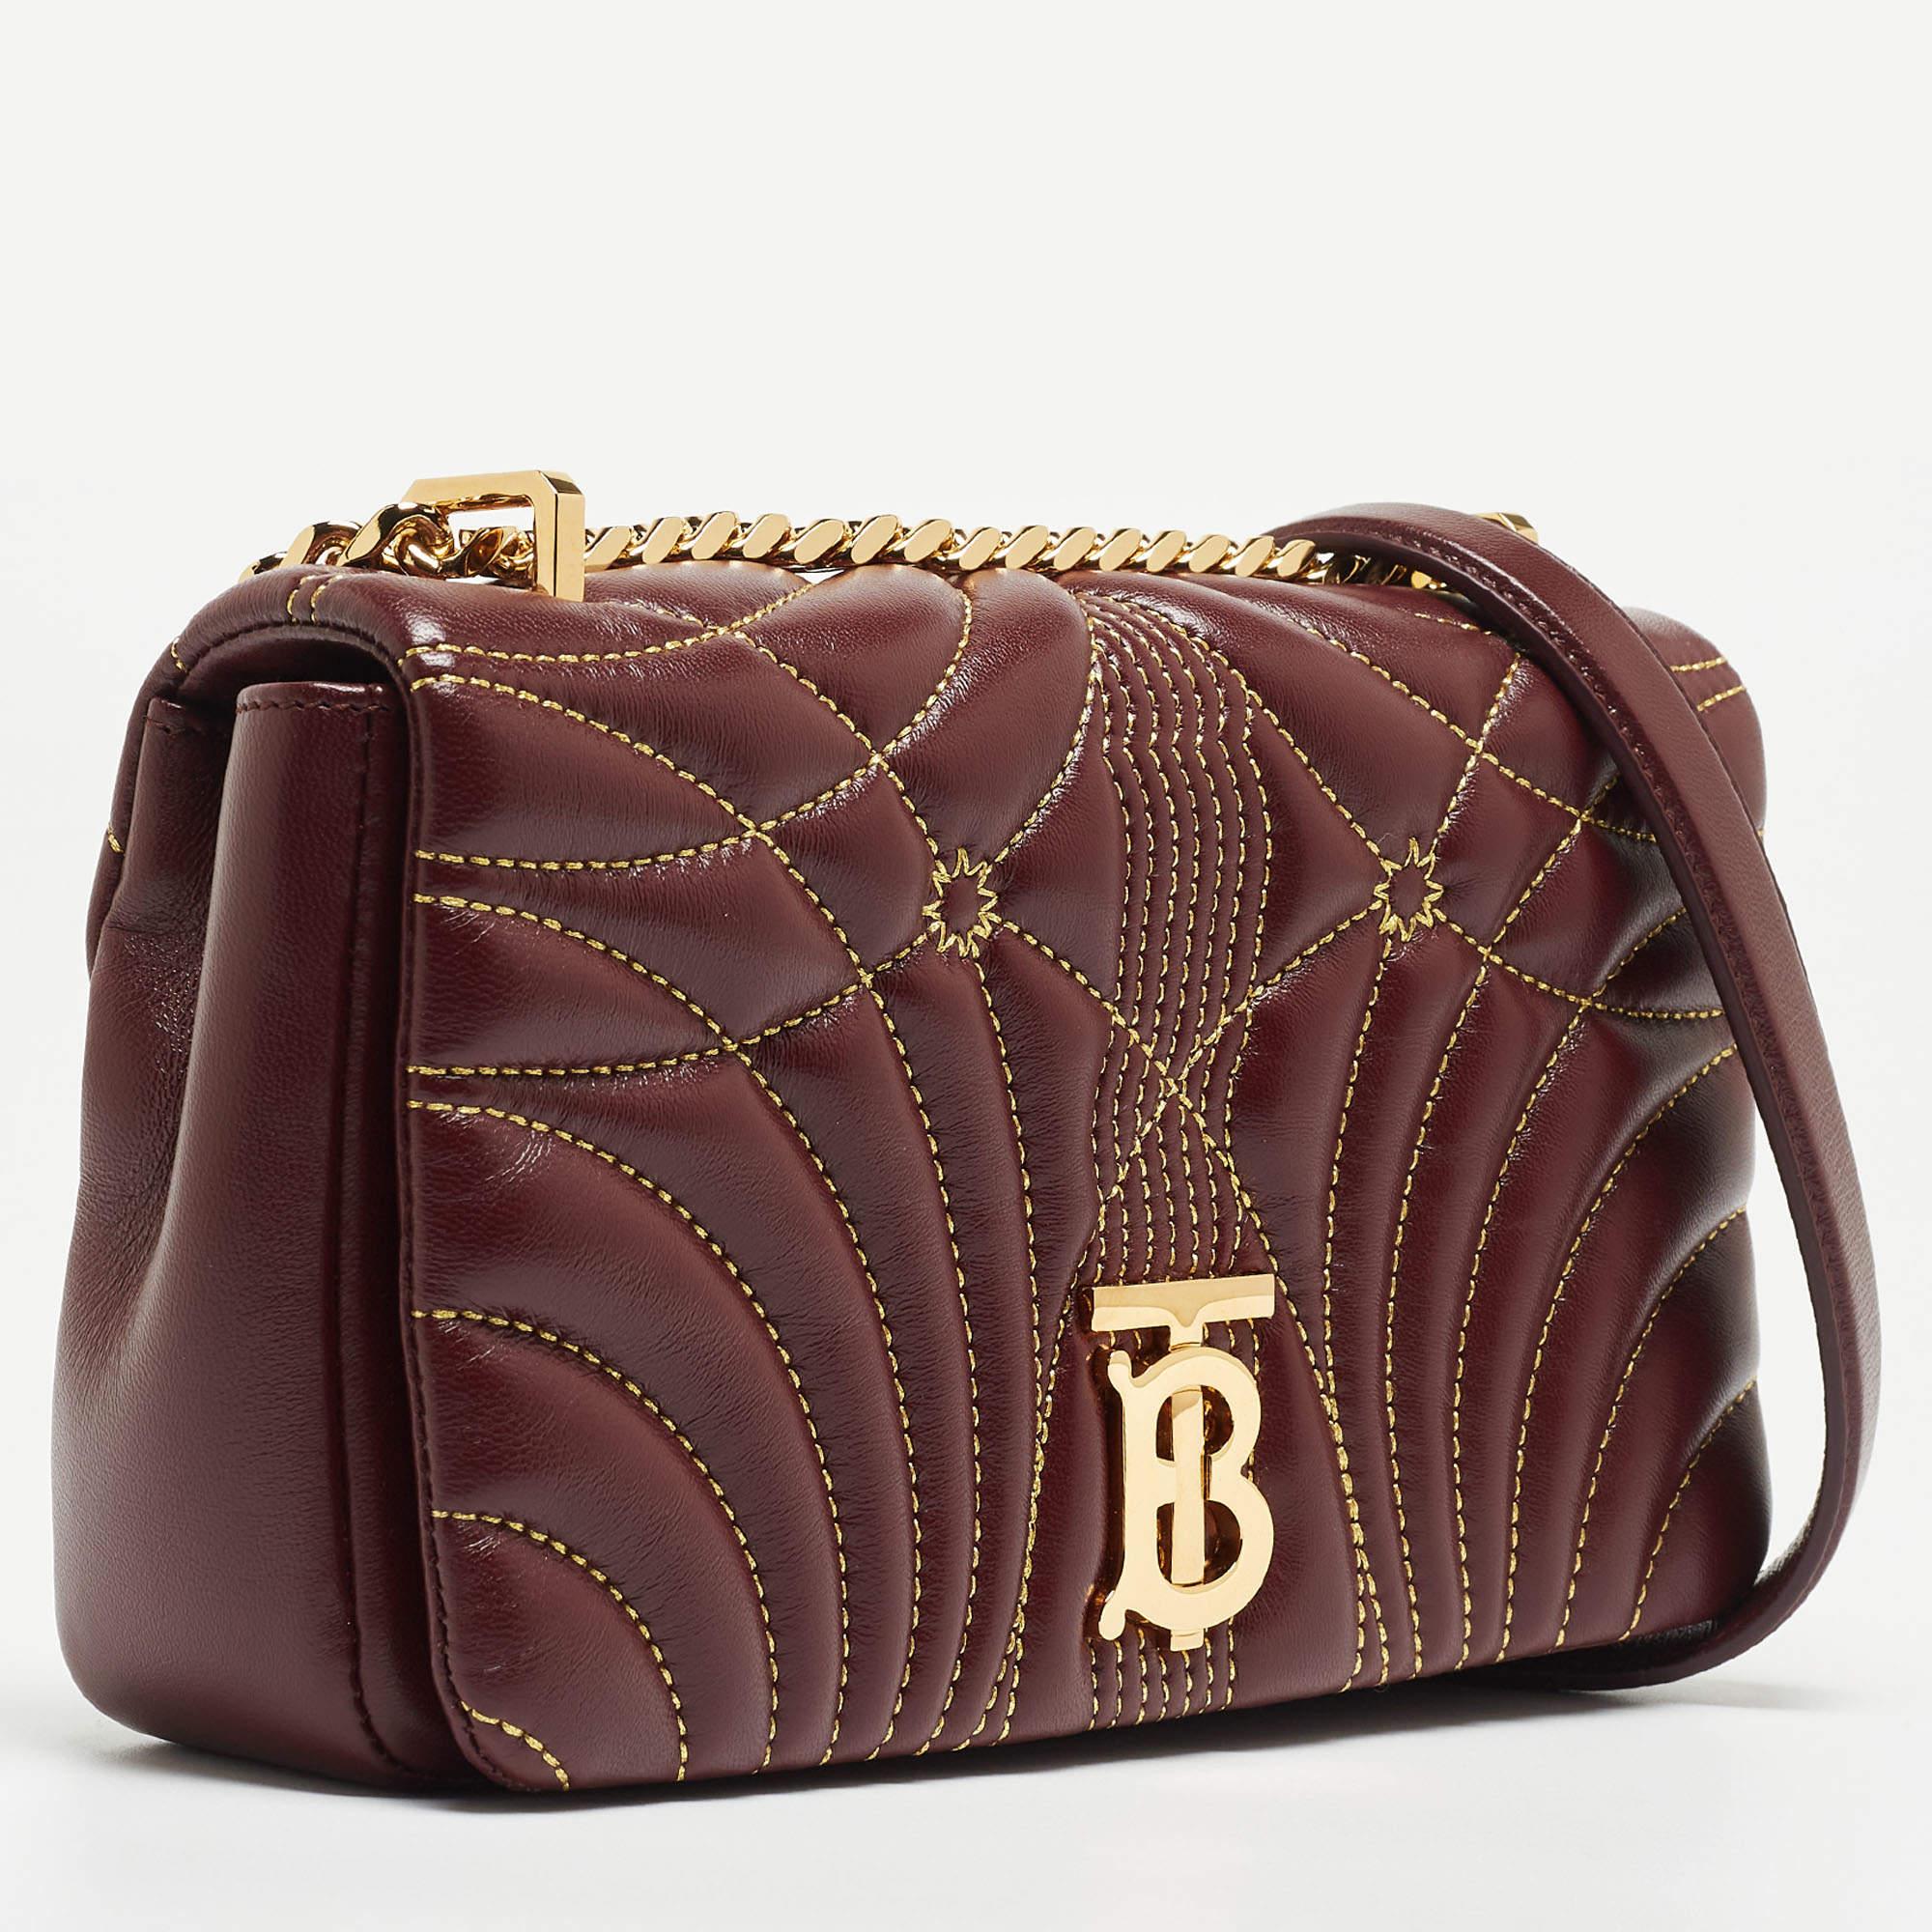 This Lola shoulder bag from Burberry does complete justice to the brand's heritage and aesthetic. It is made using quilted leather with a gold-toned accent decorating the front. It features a chain shoulder strap and an interior lined with canvas